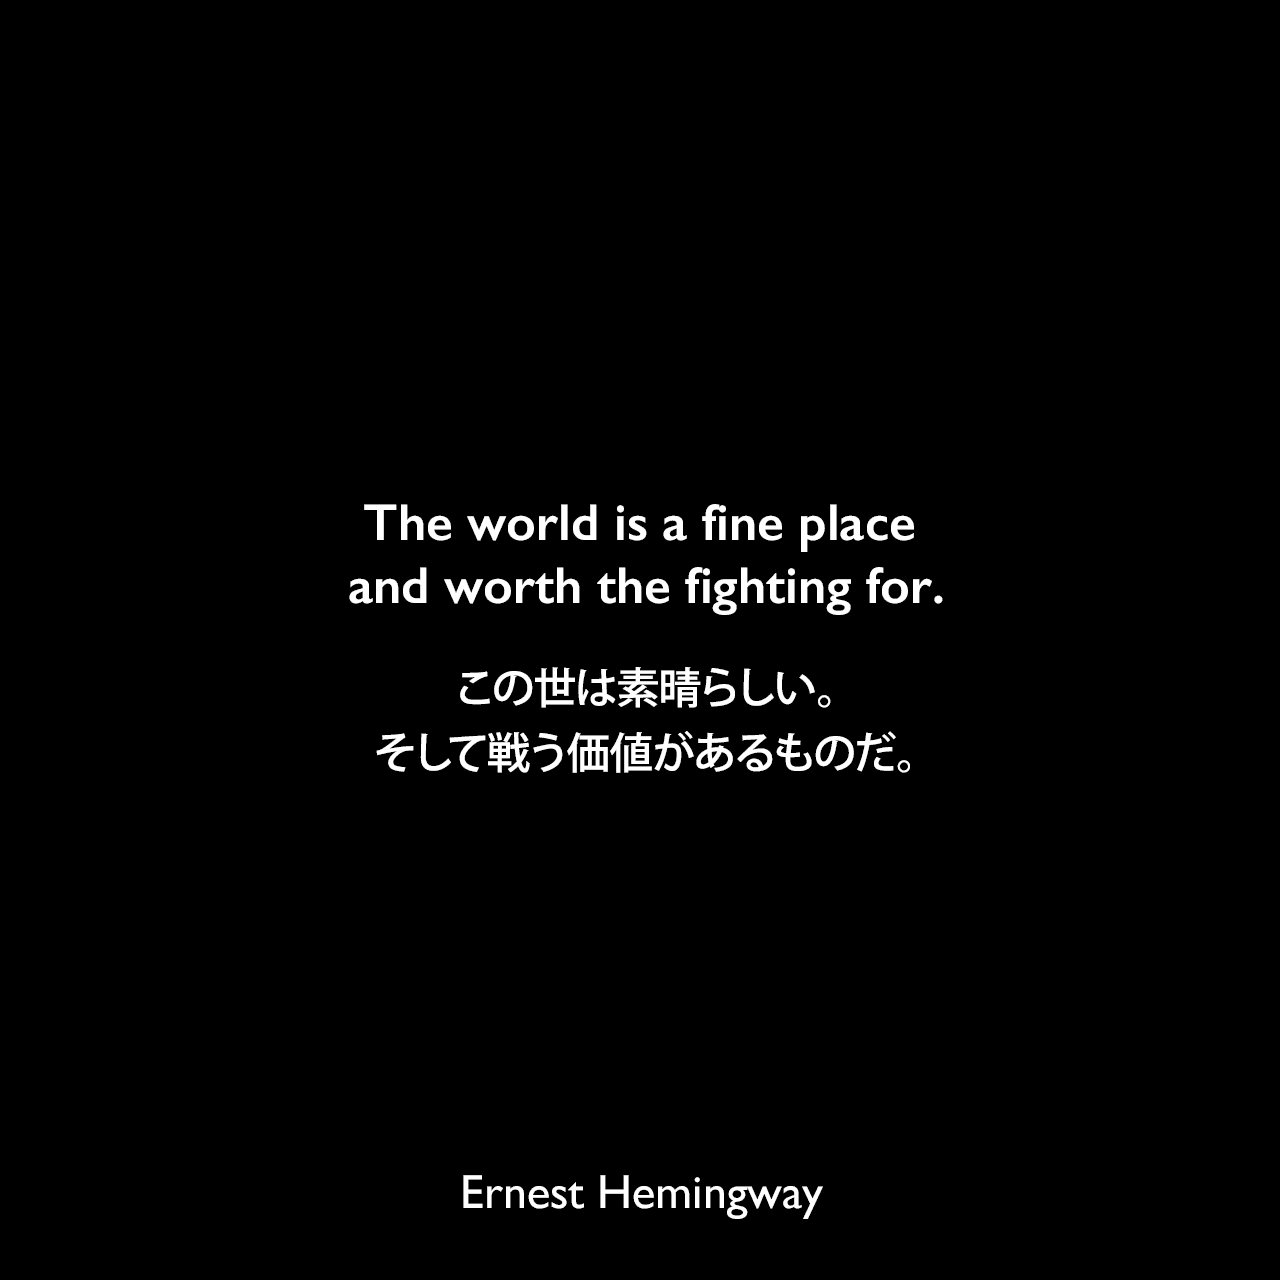 The world is a fine place and worth the fighting for.この世は素晴らしい。そして戦う価値があるものだ。（For Whom the Bell Tolls：誰がために鐘は鳴る）